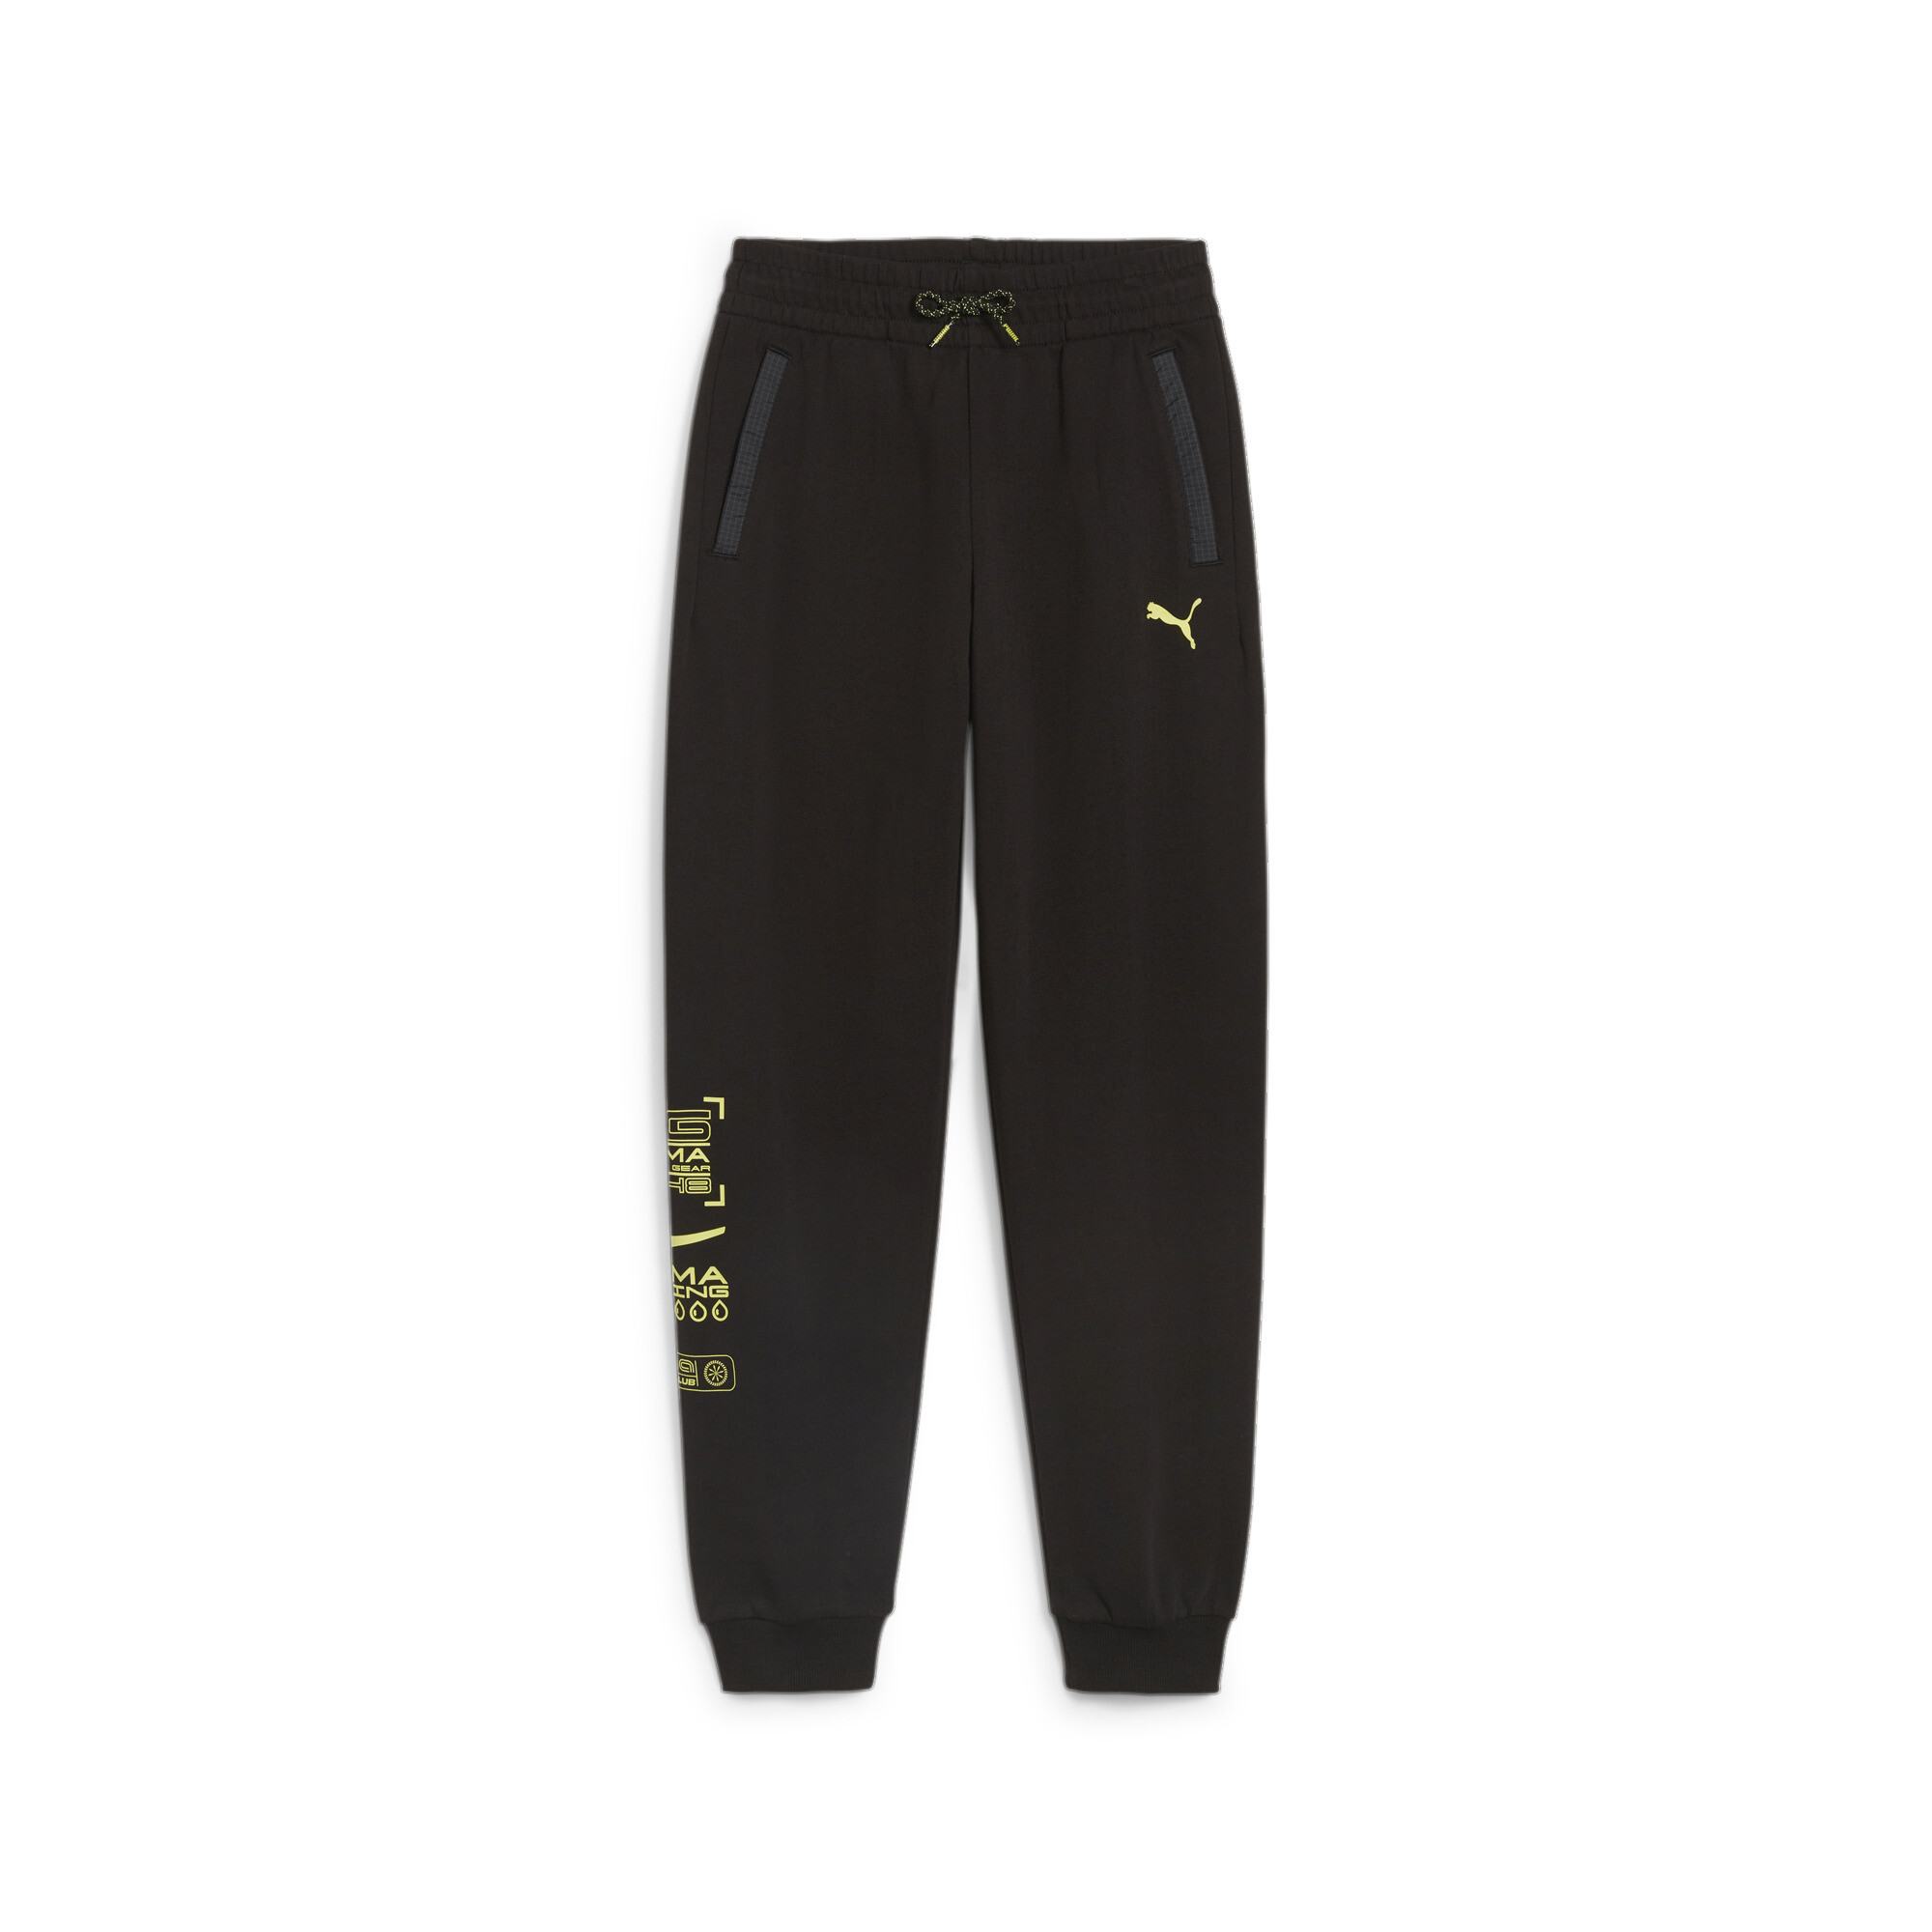 PUMA CLASSICS XCNTRY BKR Pants In Black, Size 11-12 Youth